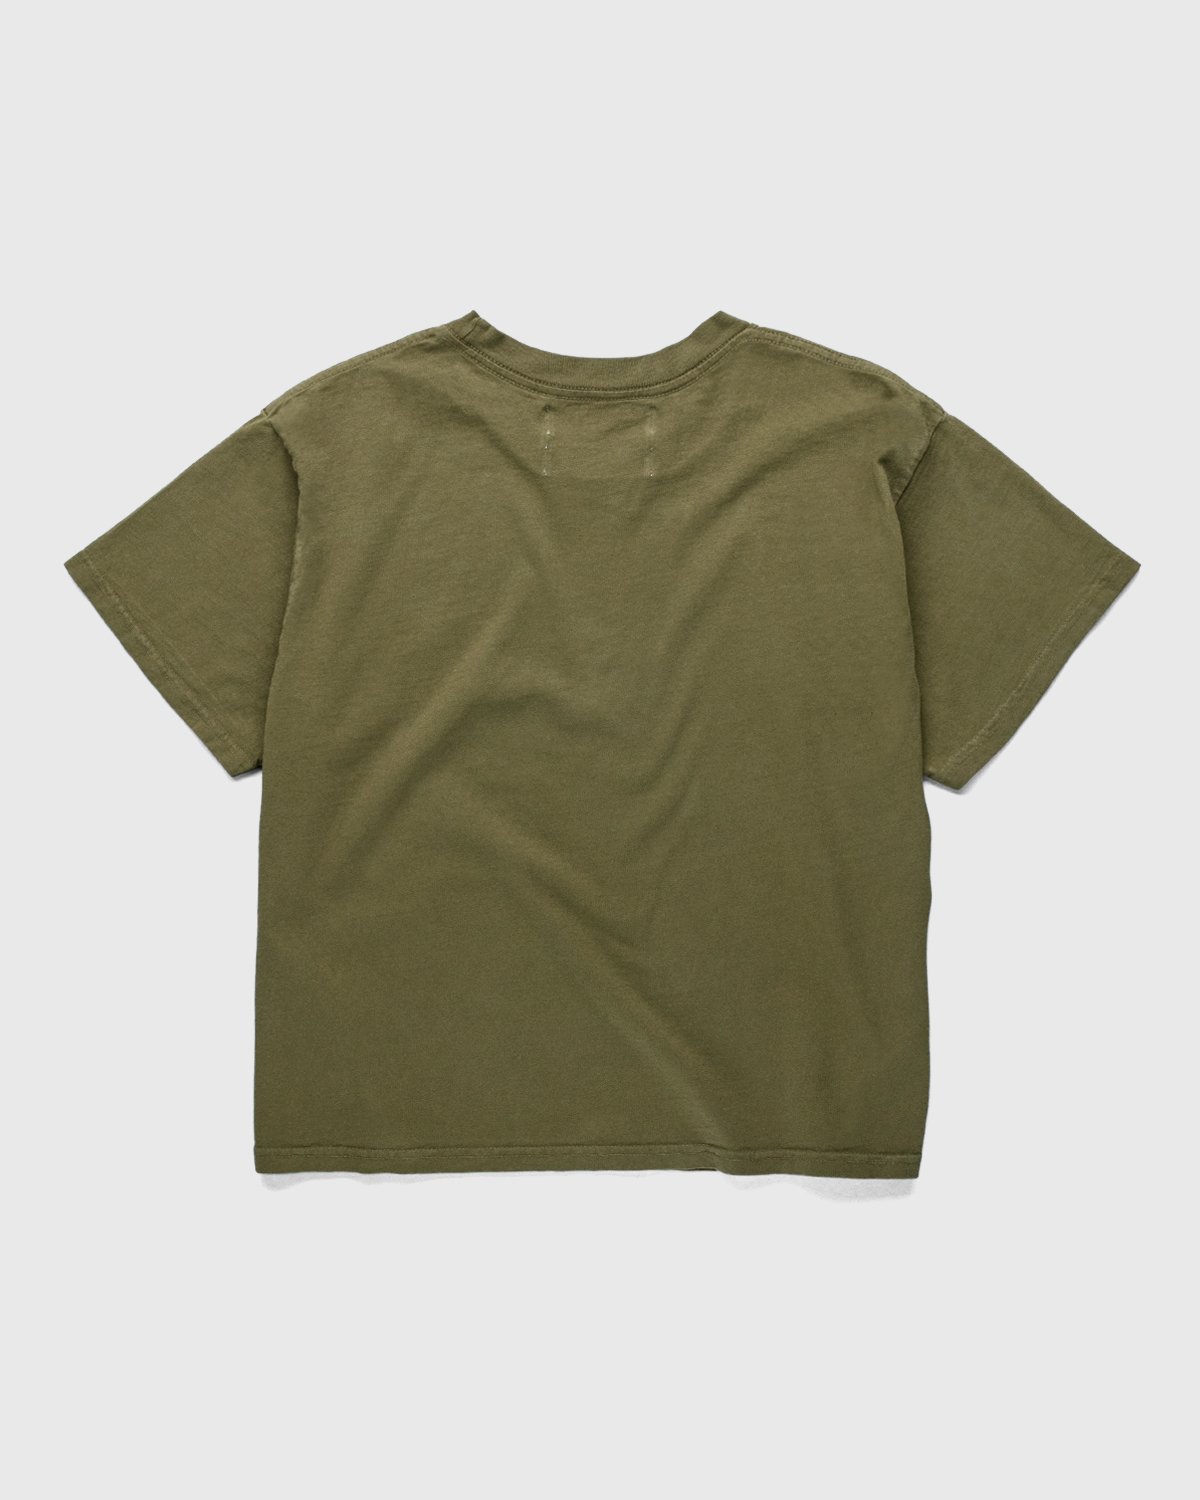 Darryl Brown - T-Shirt Military Olive - Clothing - Green - Image 2